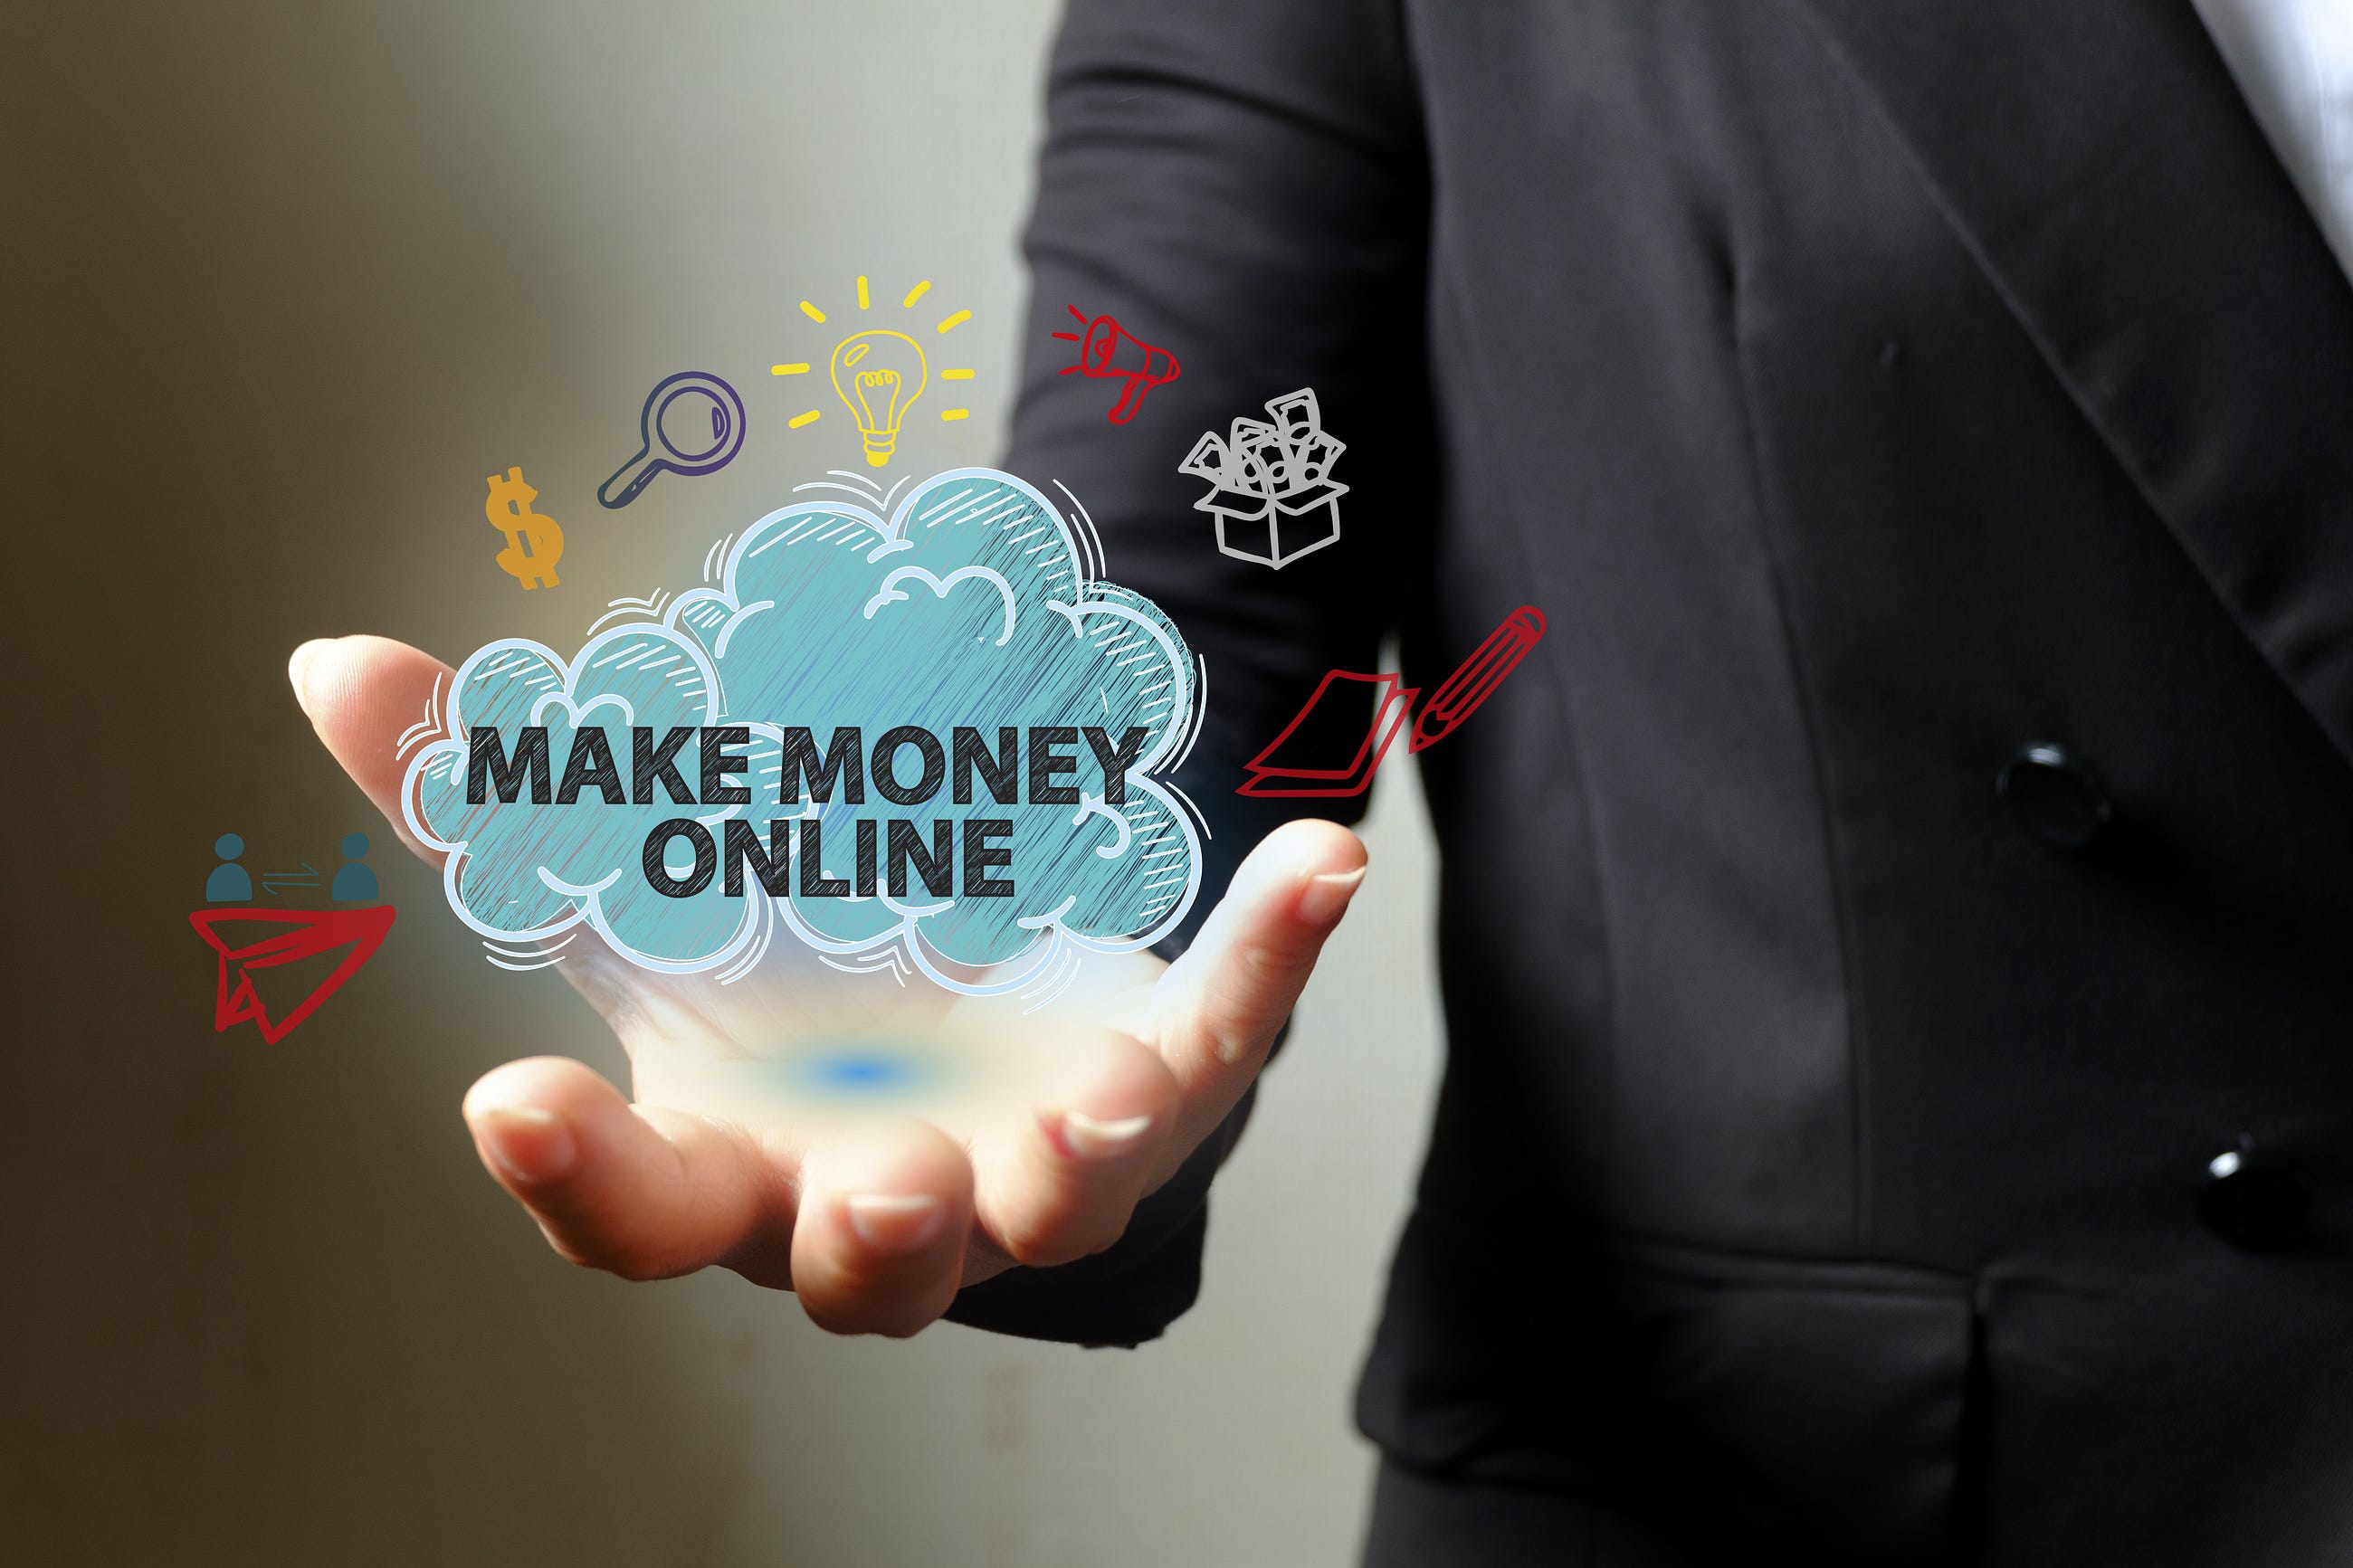 How To Make Money Online 6 Proven Ways Updated 2019 - the internet was the start of a new era that changed the lives of everyone in many ways it serves as a tool for easier faster and inexpensive